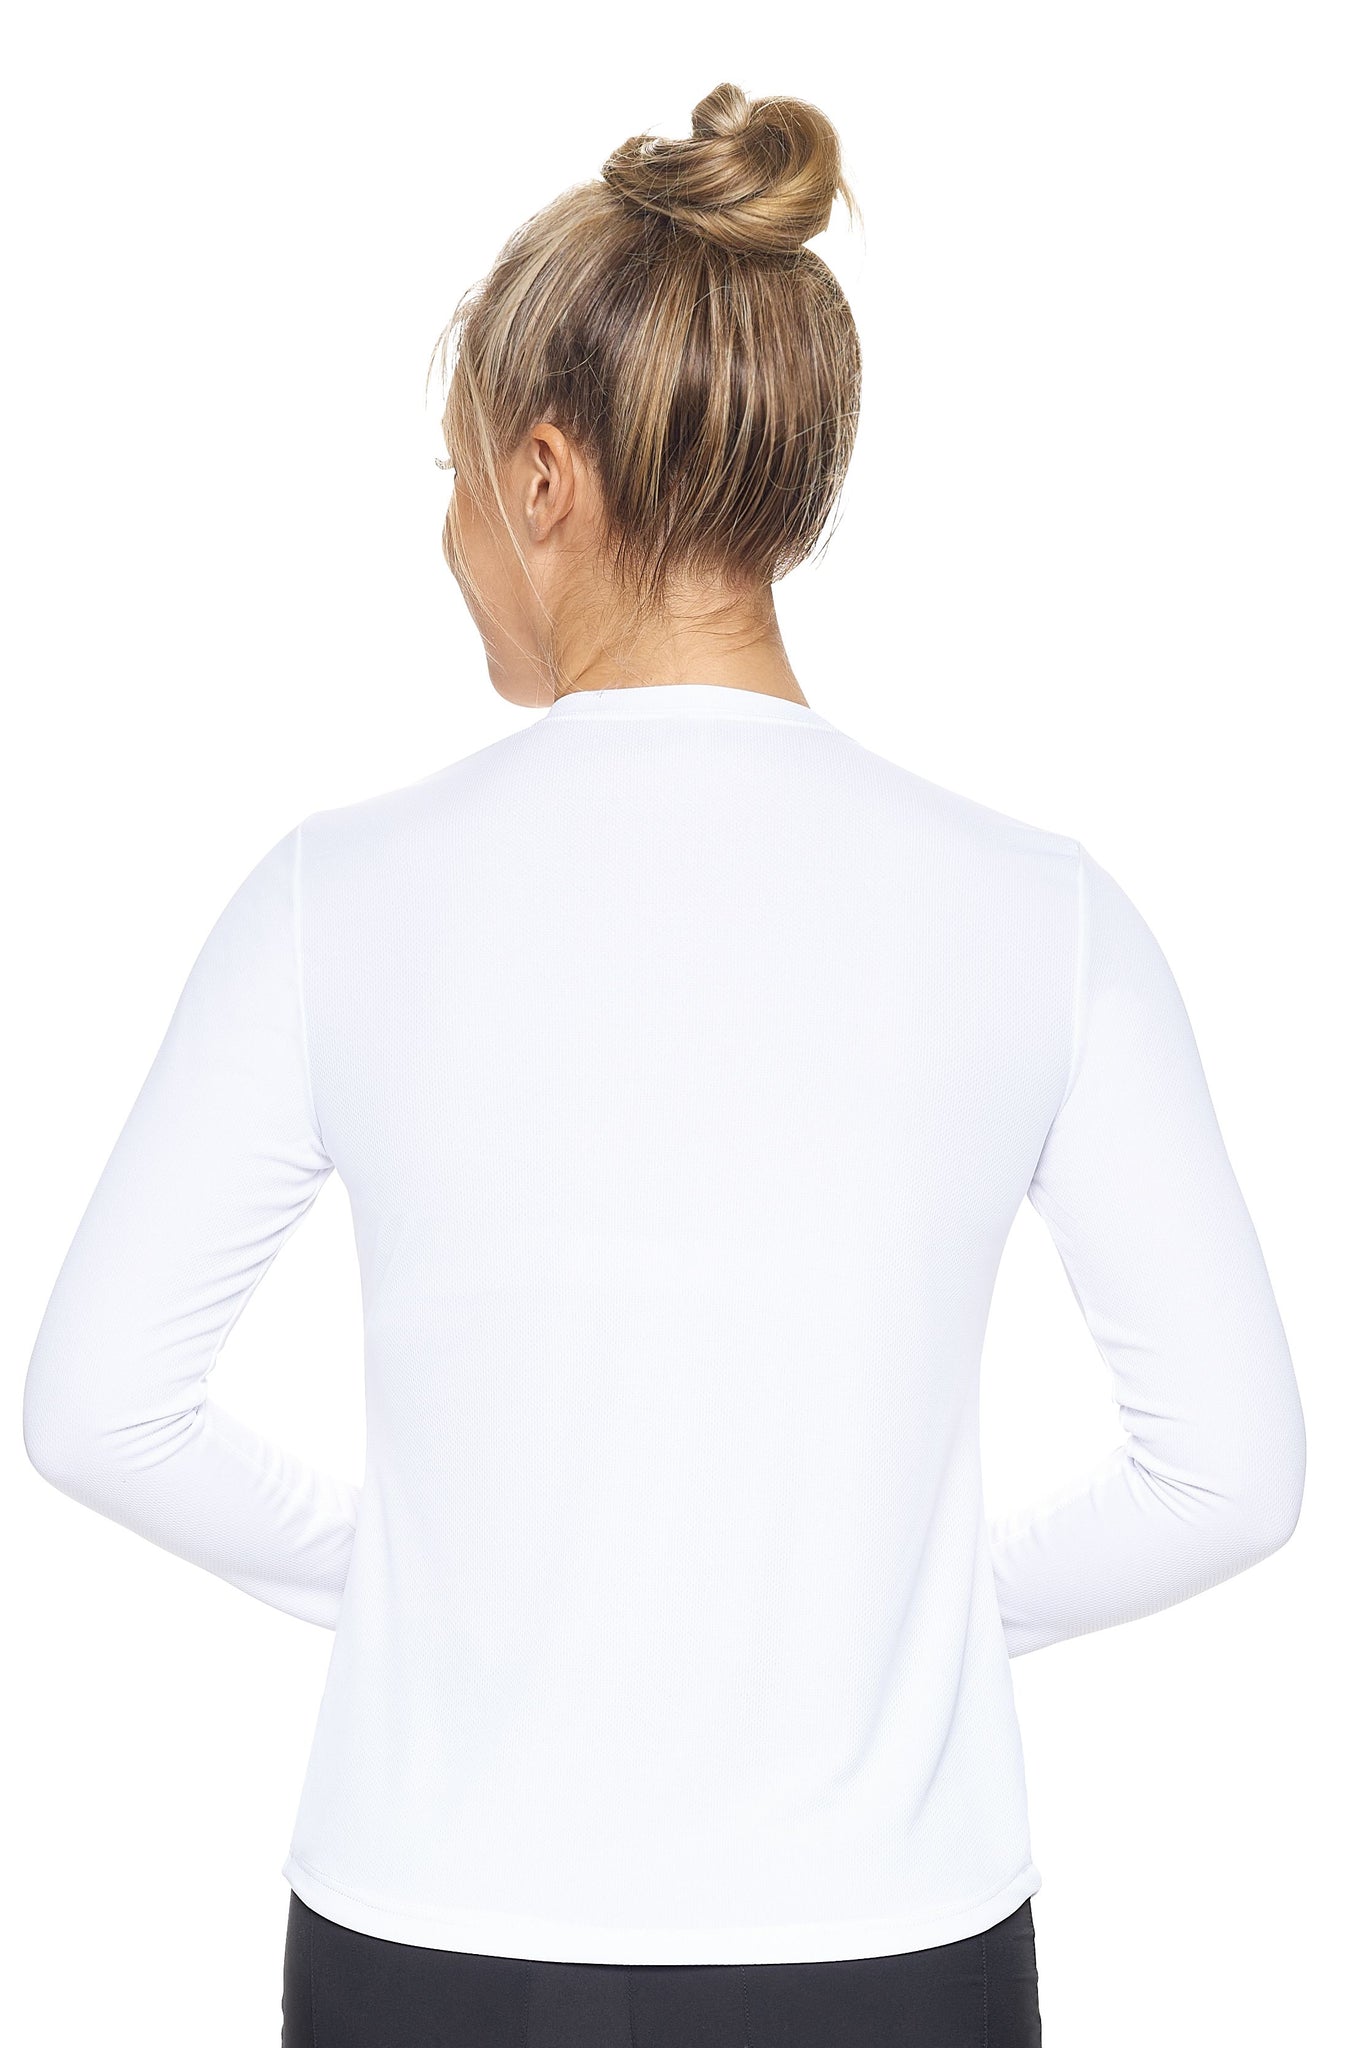 Expert Brand Wholesale Women's Oxymesh™ Long Sleeve Tec Tee in white image 3#white